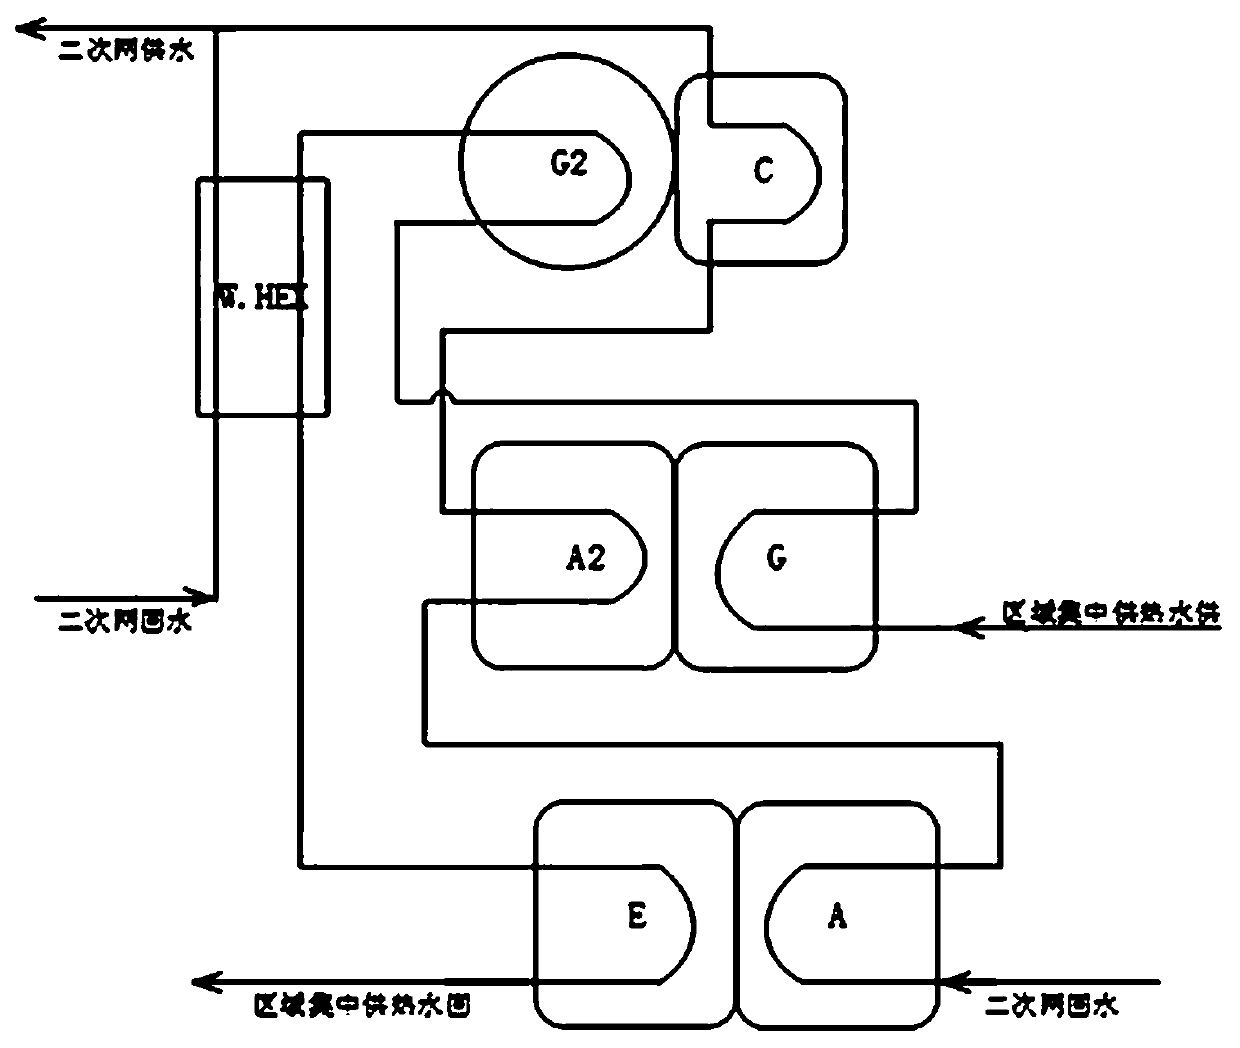 Absorption-type large-temperature-difference heat exchange unit driven by low-temperature hot water